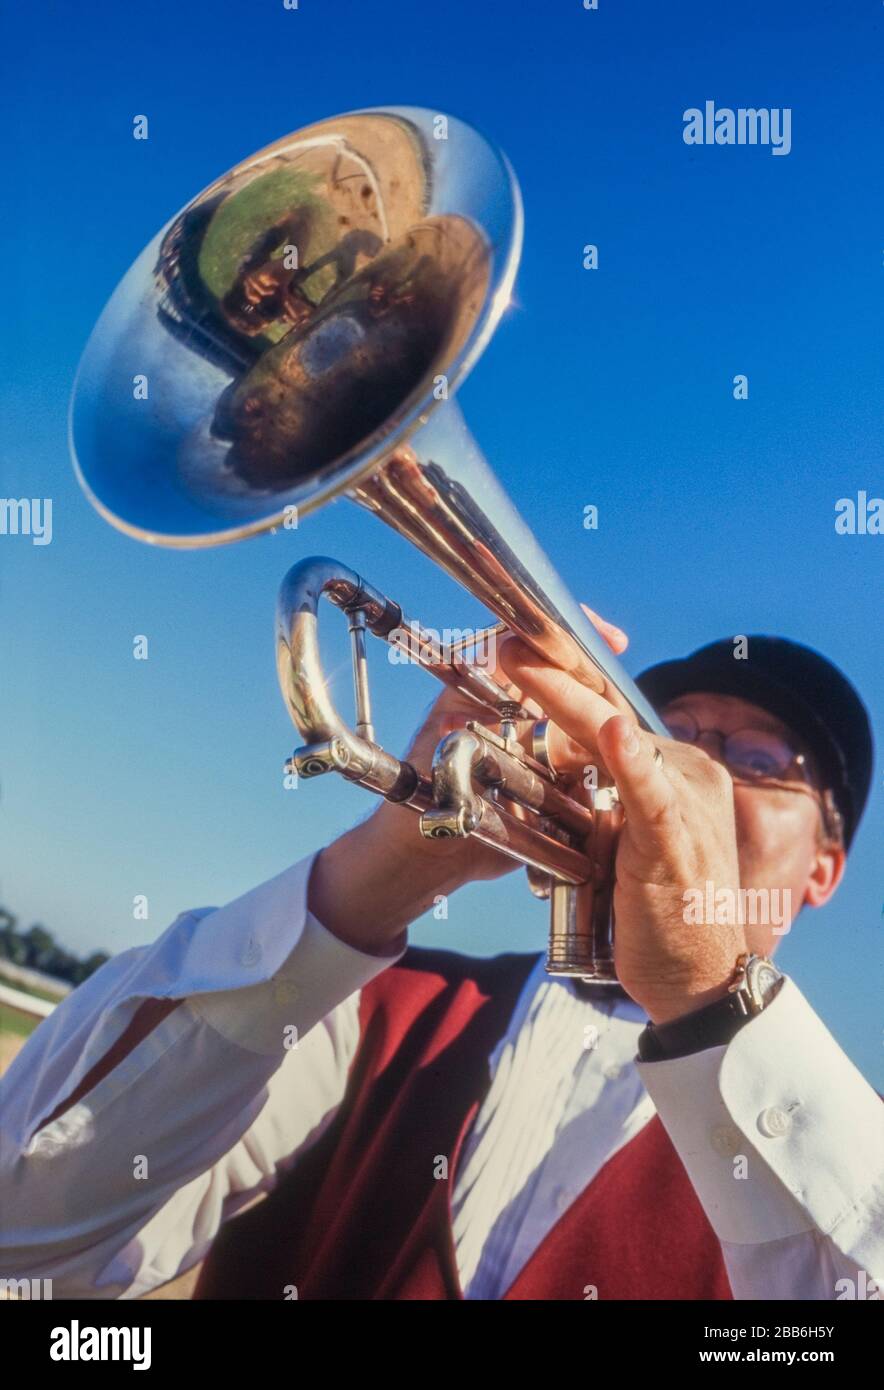 Bugler gives call to post at Horse racing venue Stock Photo